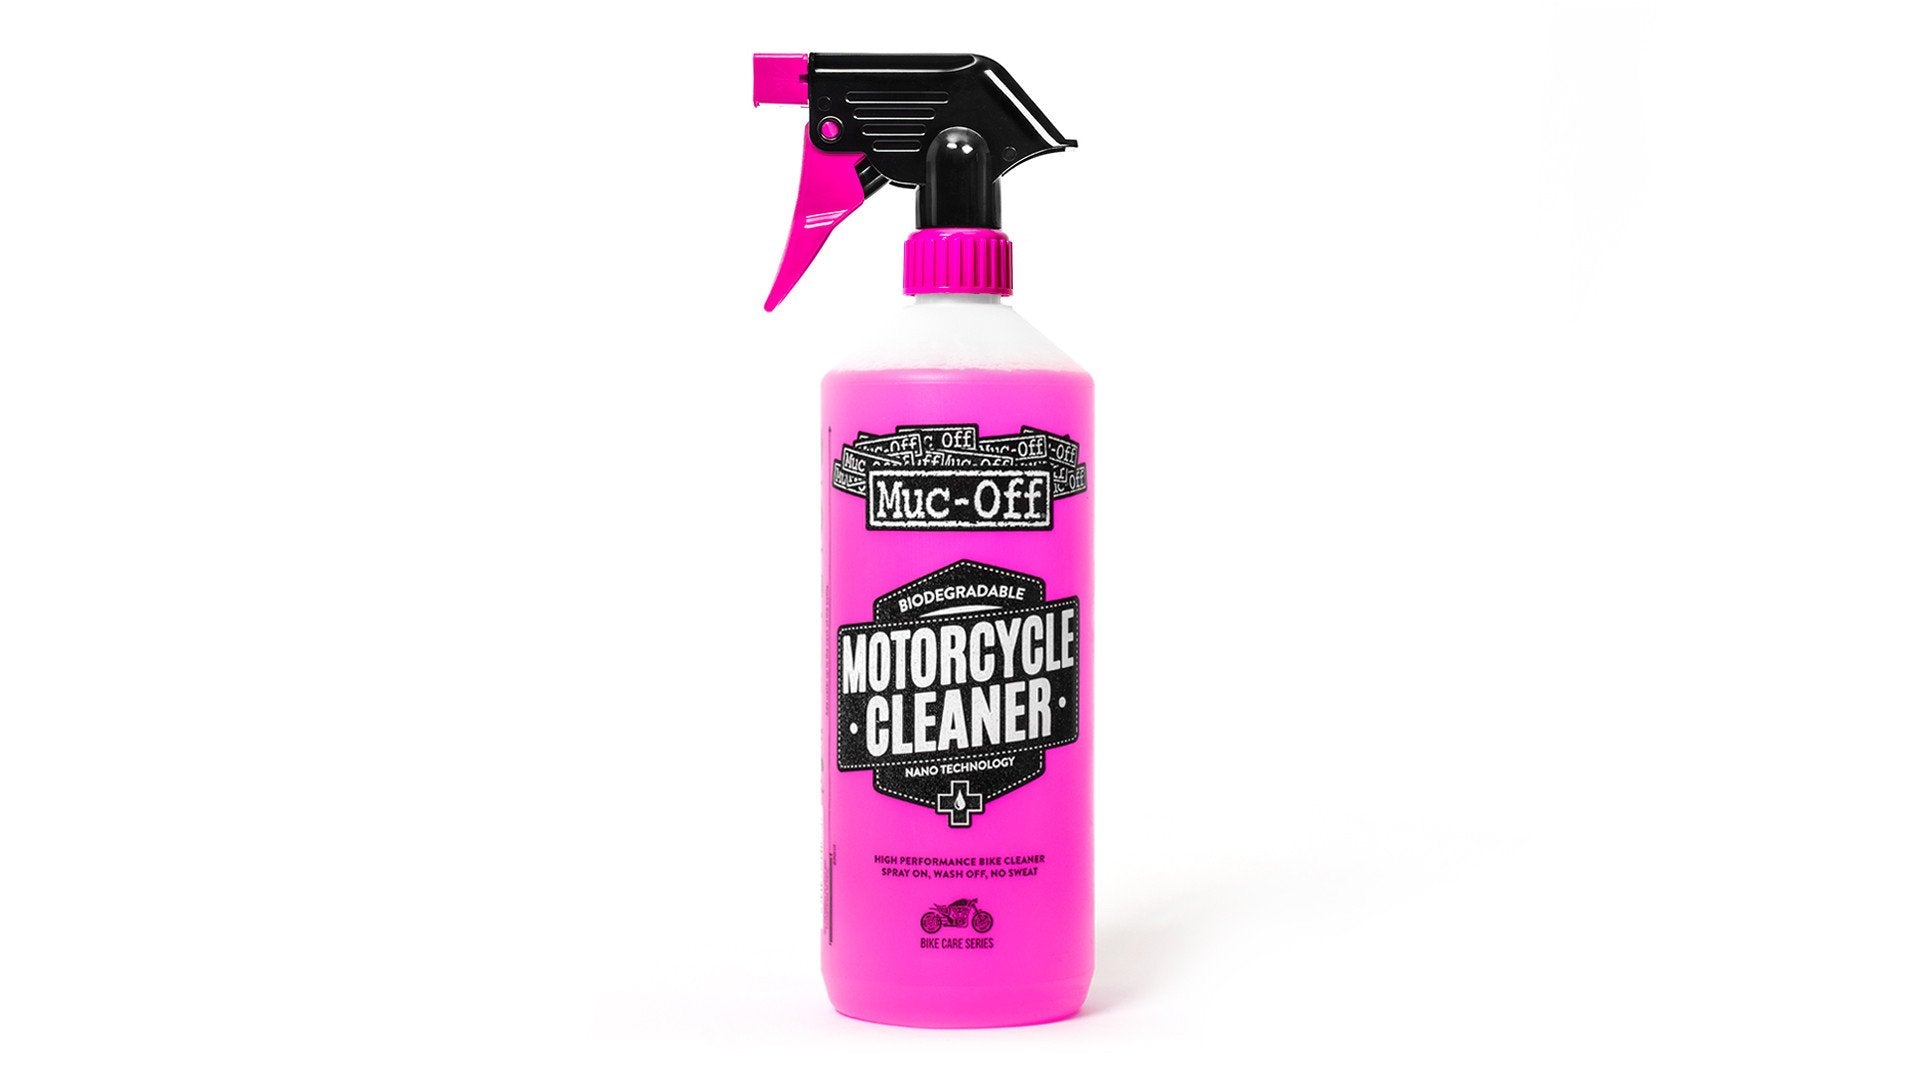 Muc-off motorcycle cleaner pink